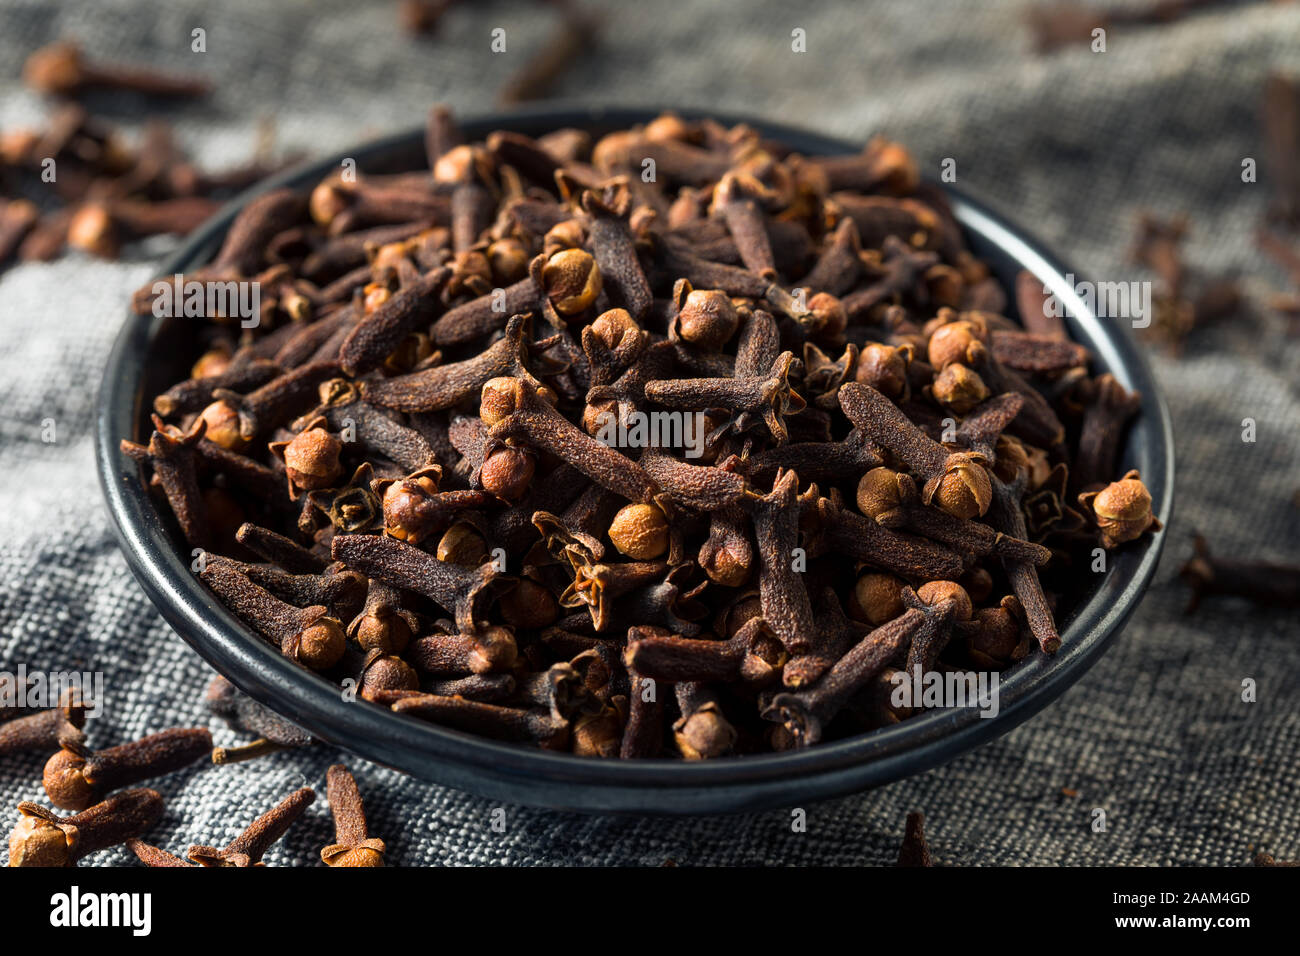 Dry Organic Clove Spice in a Bowl Stock Photo